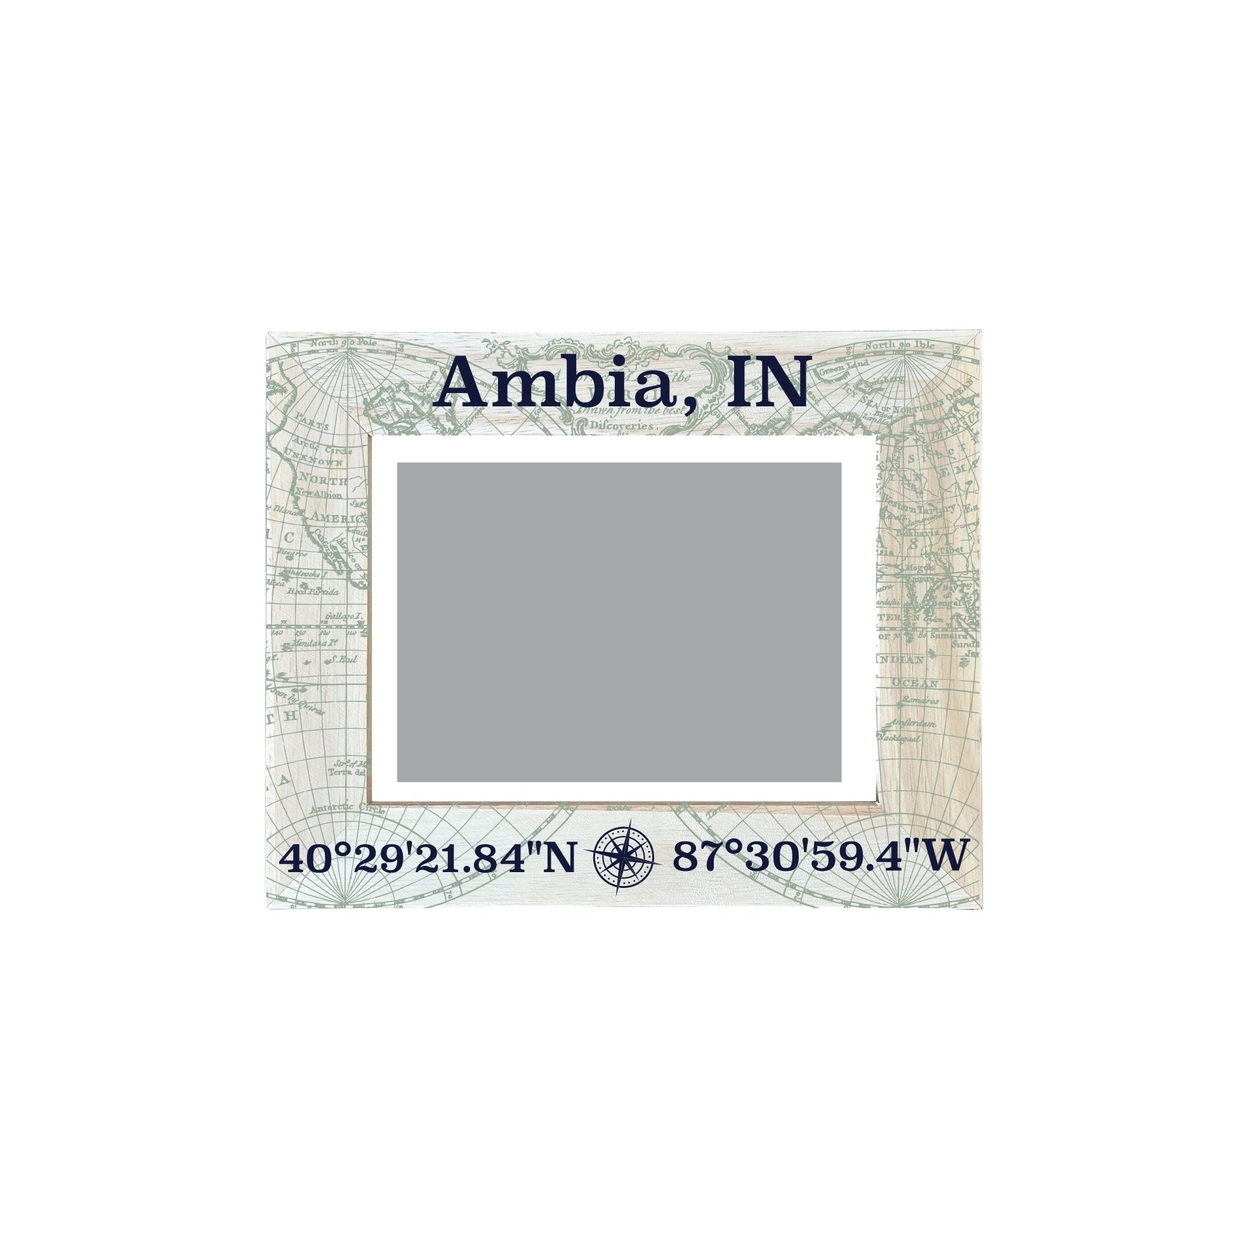 Ambia Indiana Souvenir Wooden Photo Frame Compass Coordinates Design Matted To 4 X 6